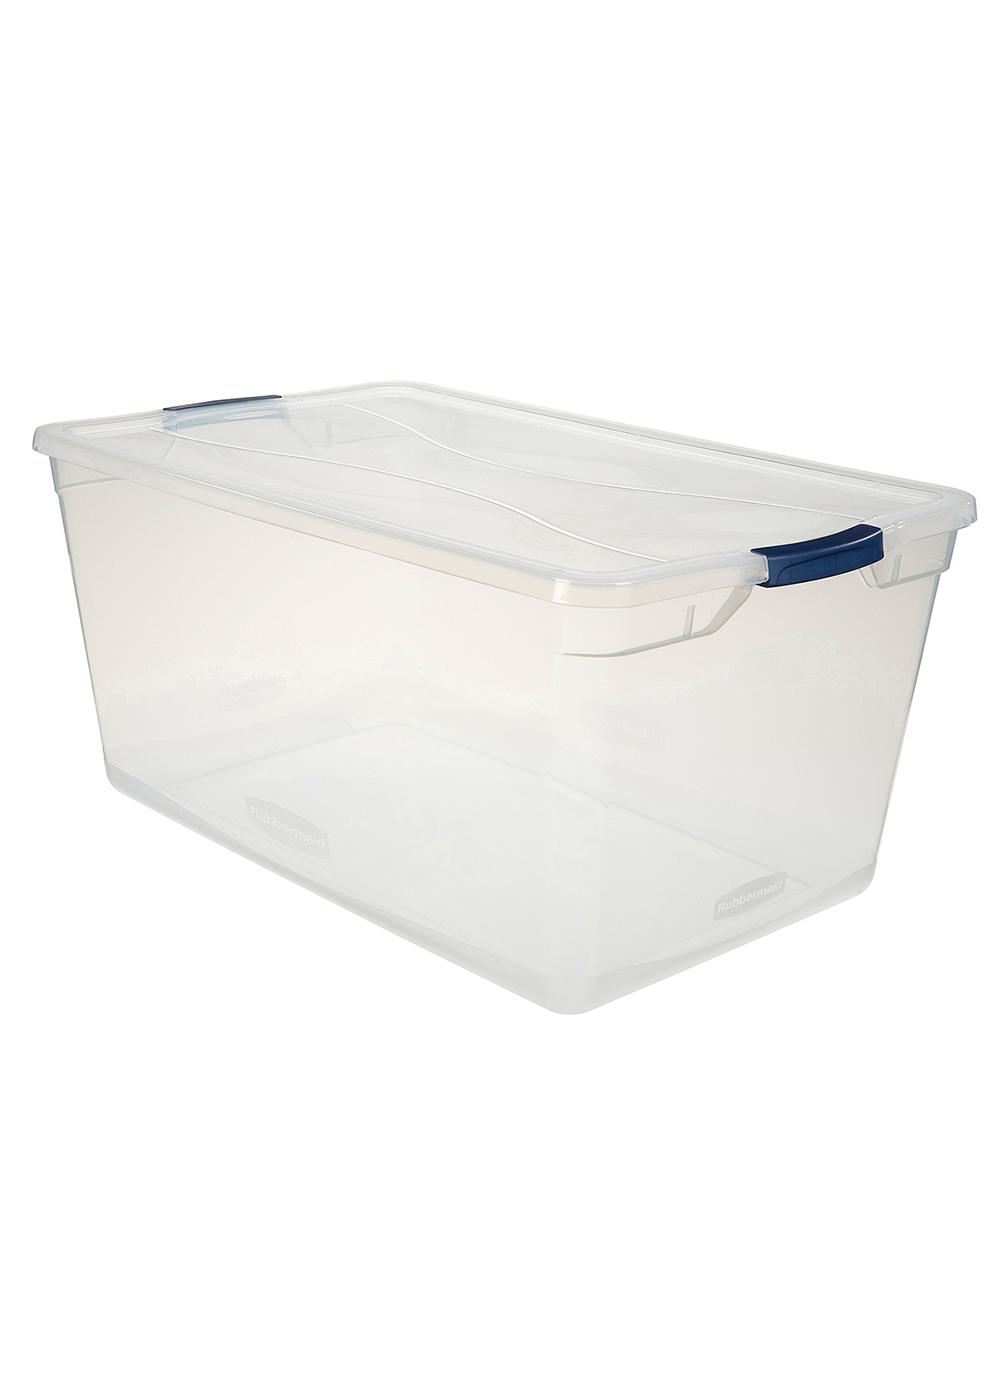 Rubbermaid Cleverstore Latching Storage Box; image 3 of 4